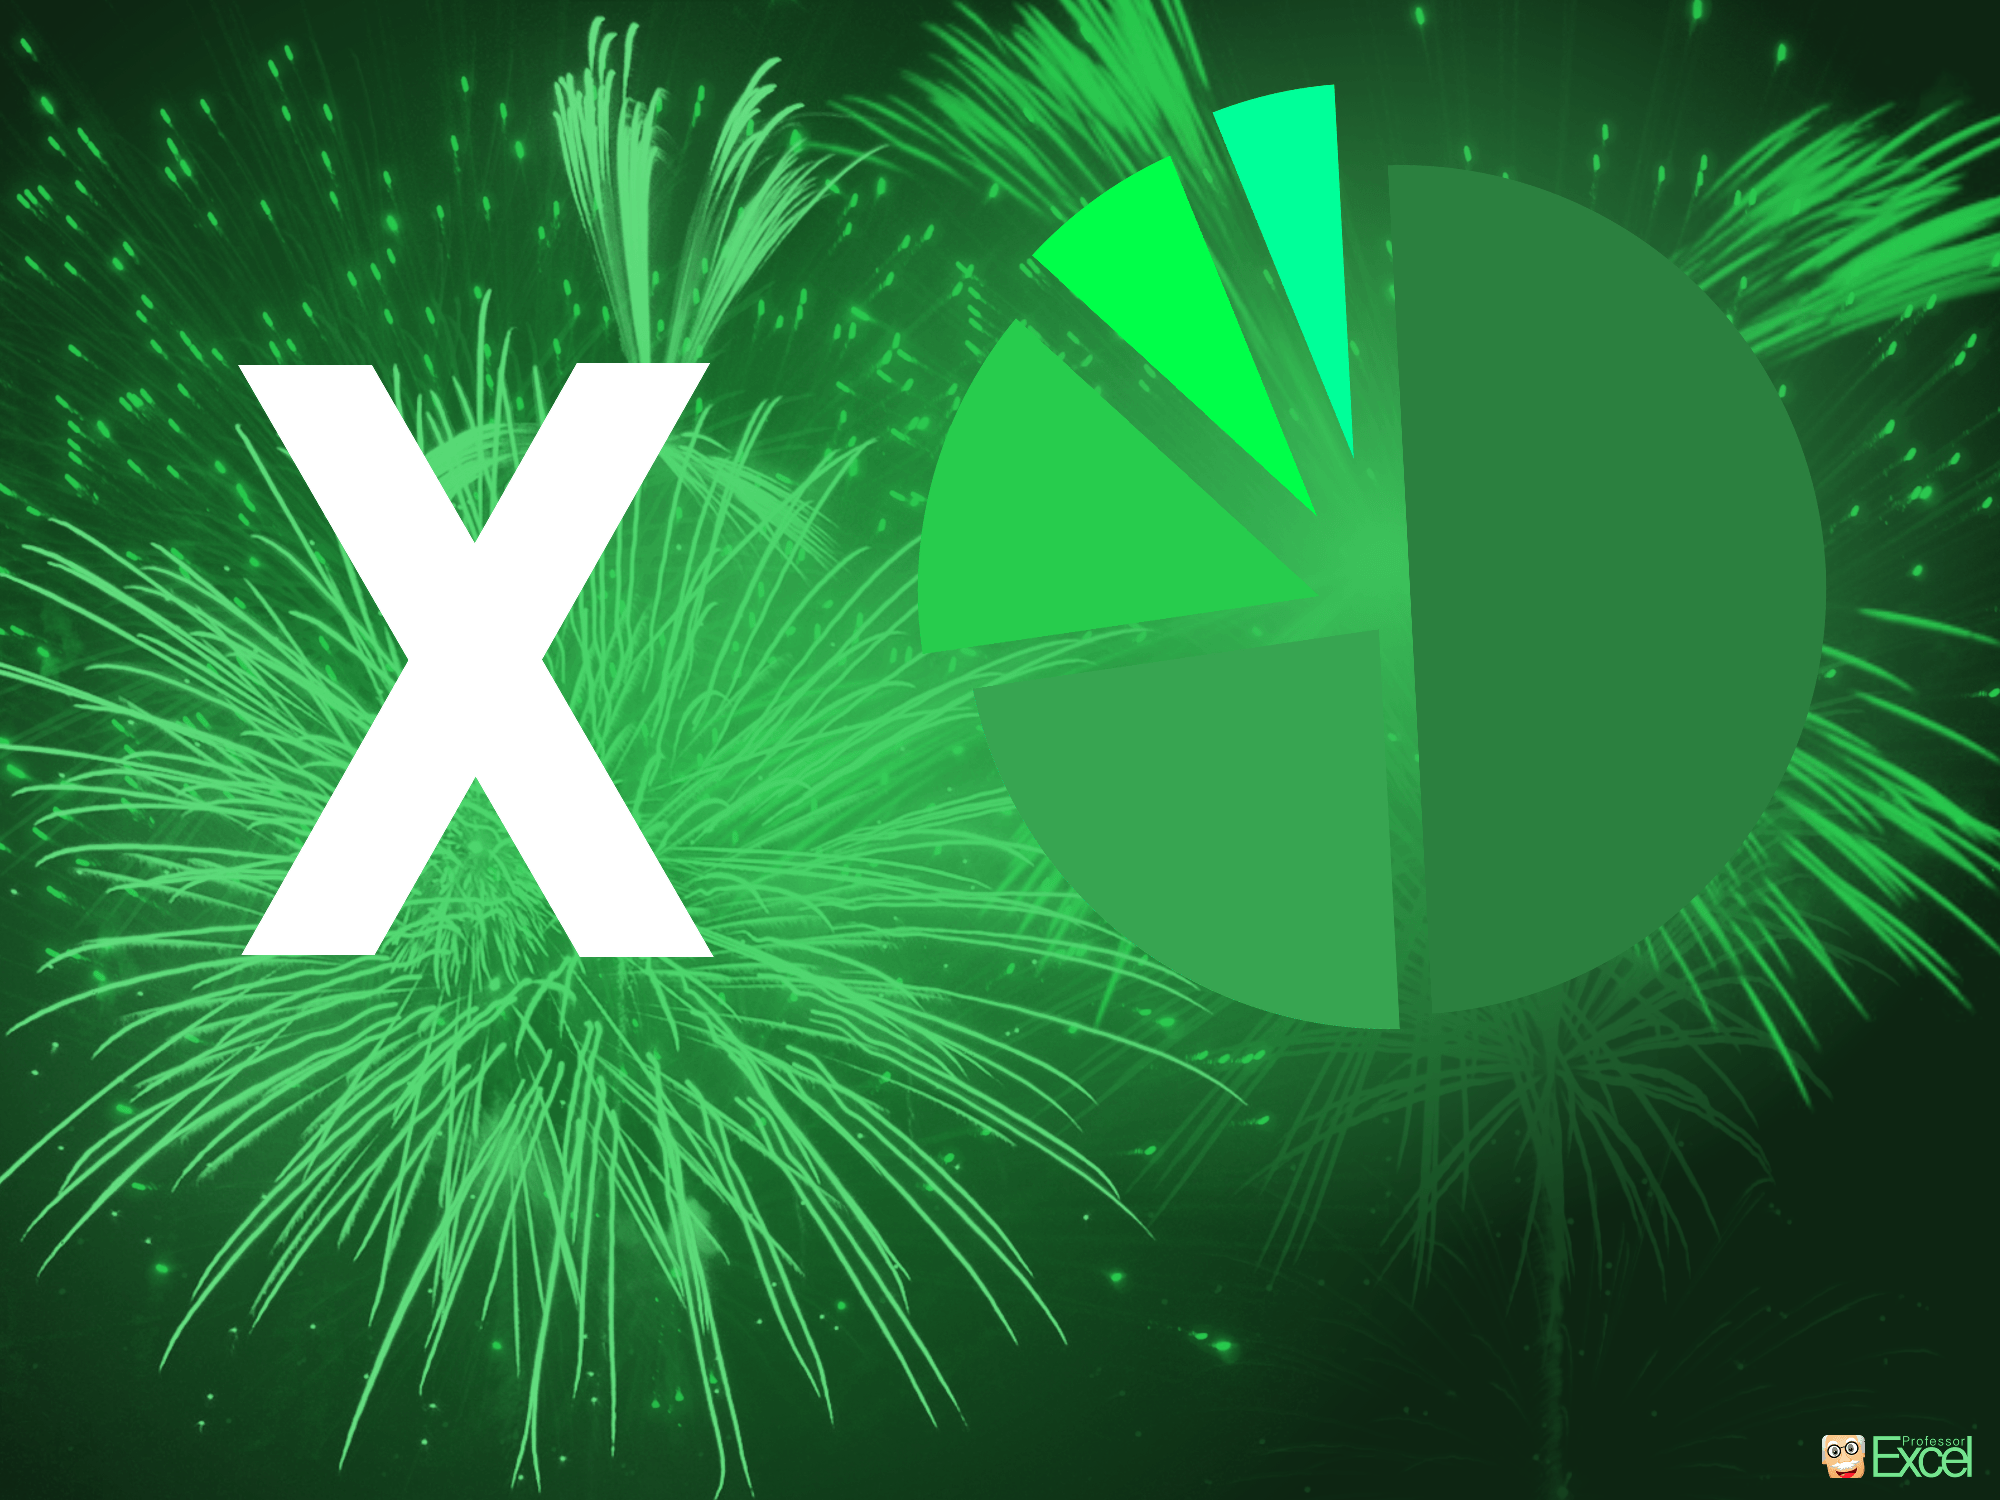 Excel Wallpaper for Free Download